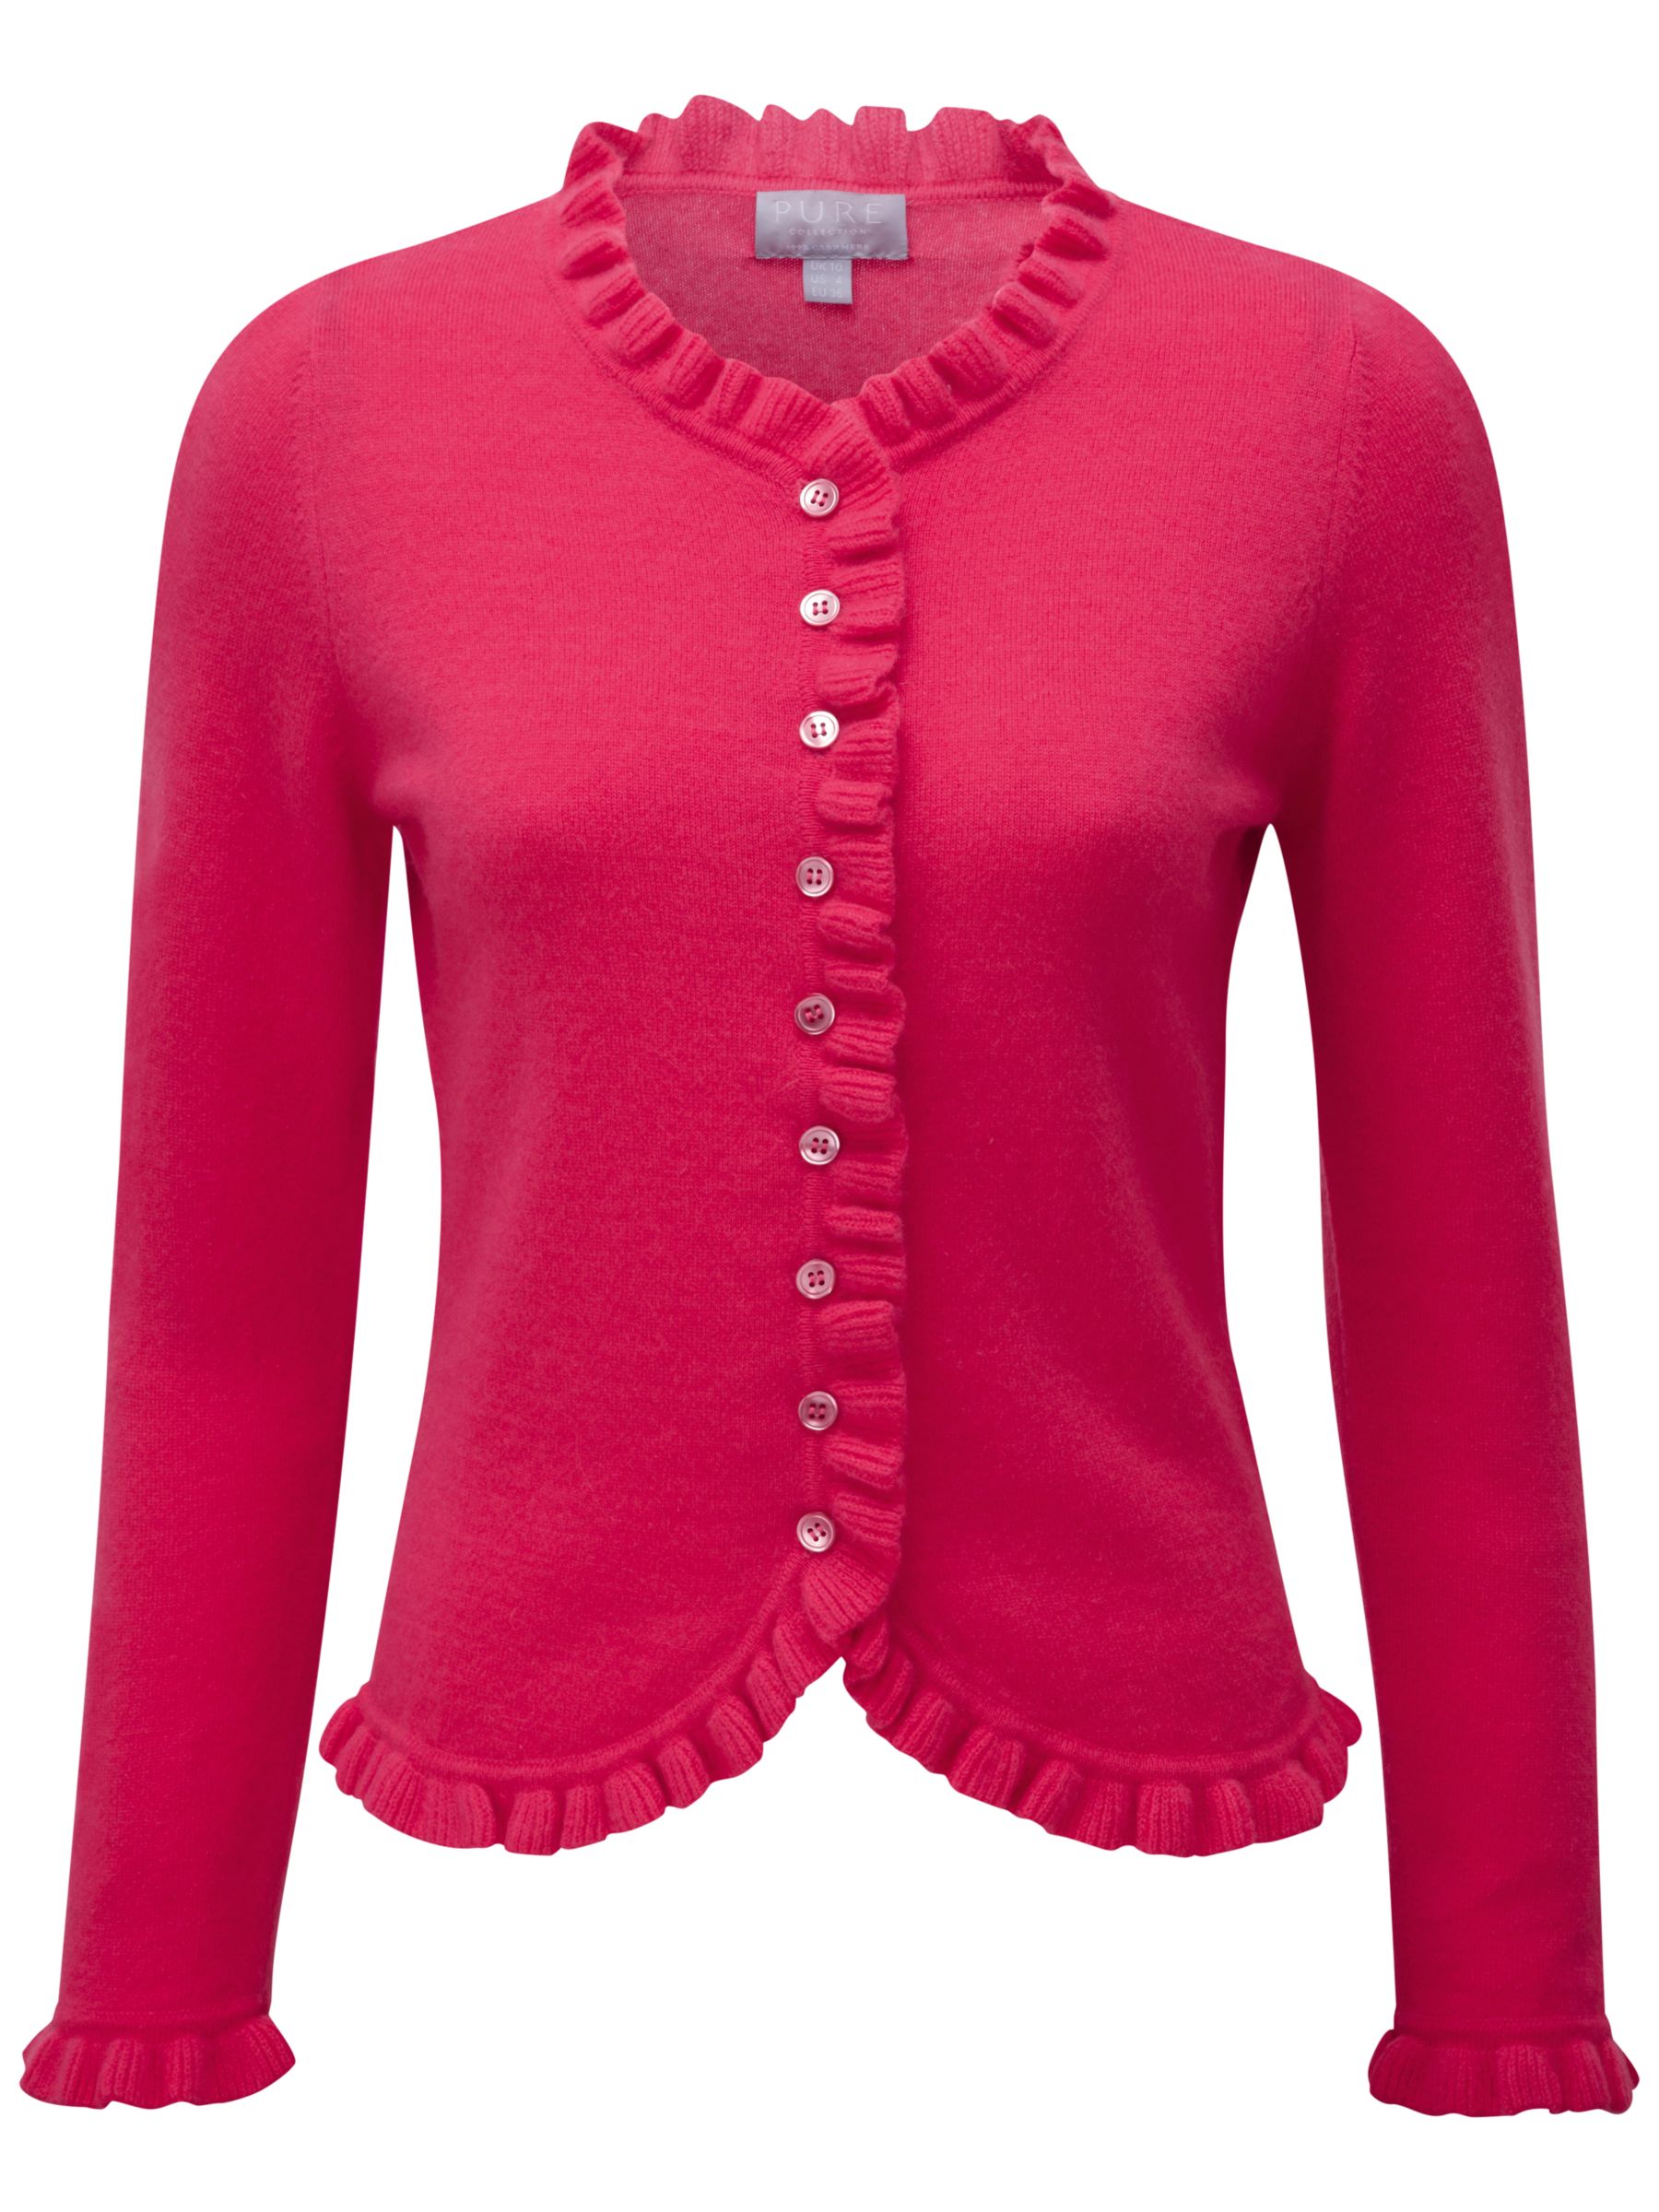 Pure Collection Ruffle Edge Cardigan at John Lewis & Partners